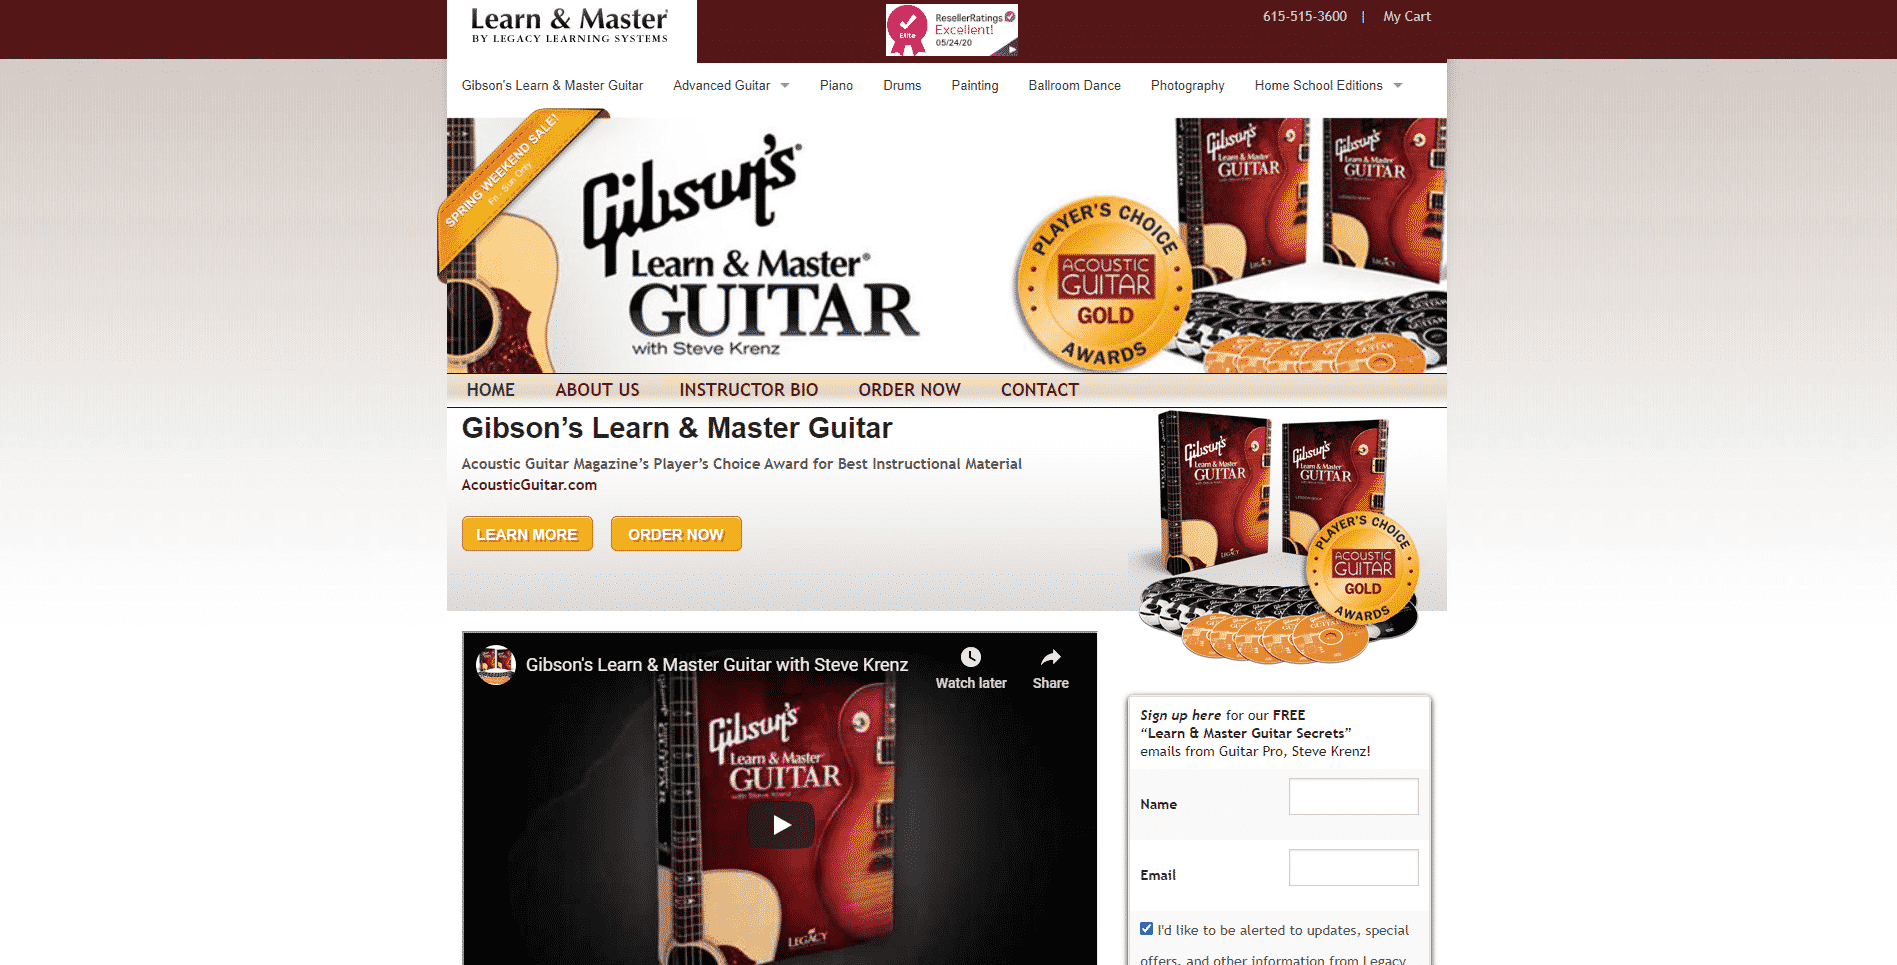 Learn & Master Guitar Lessons for Intermediate Online